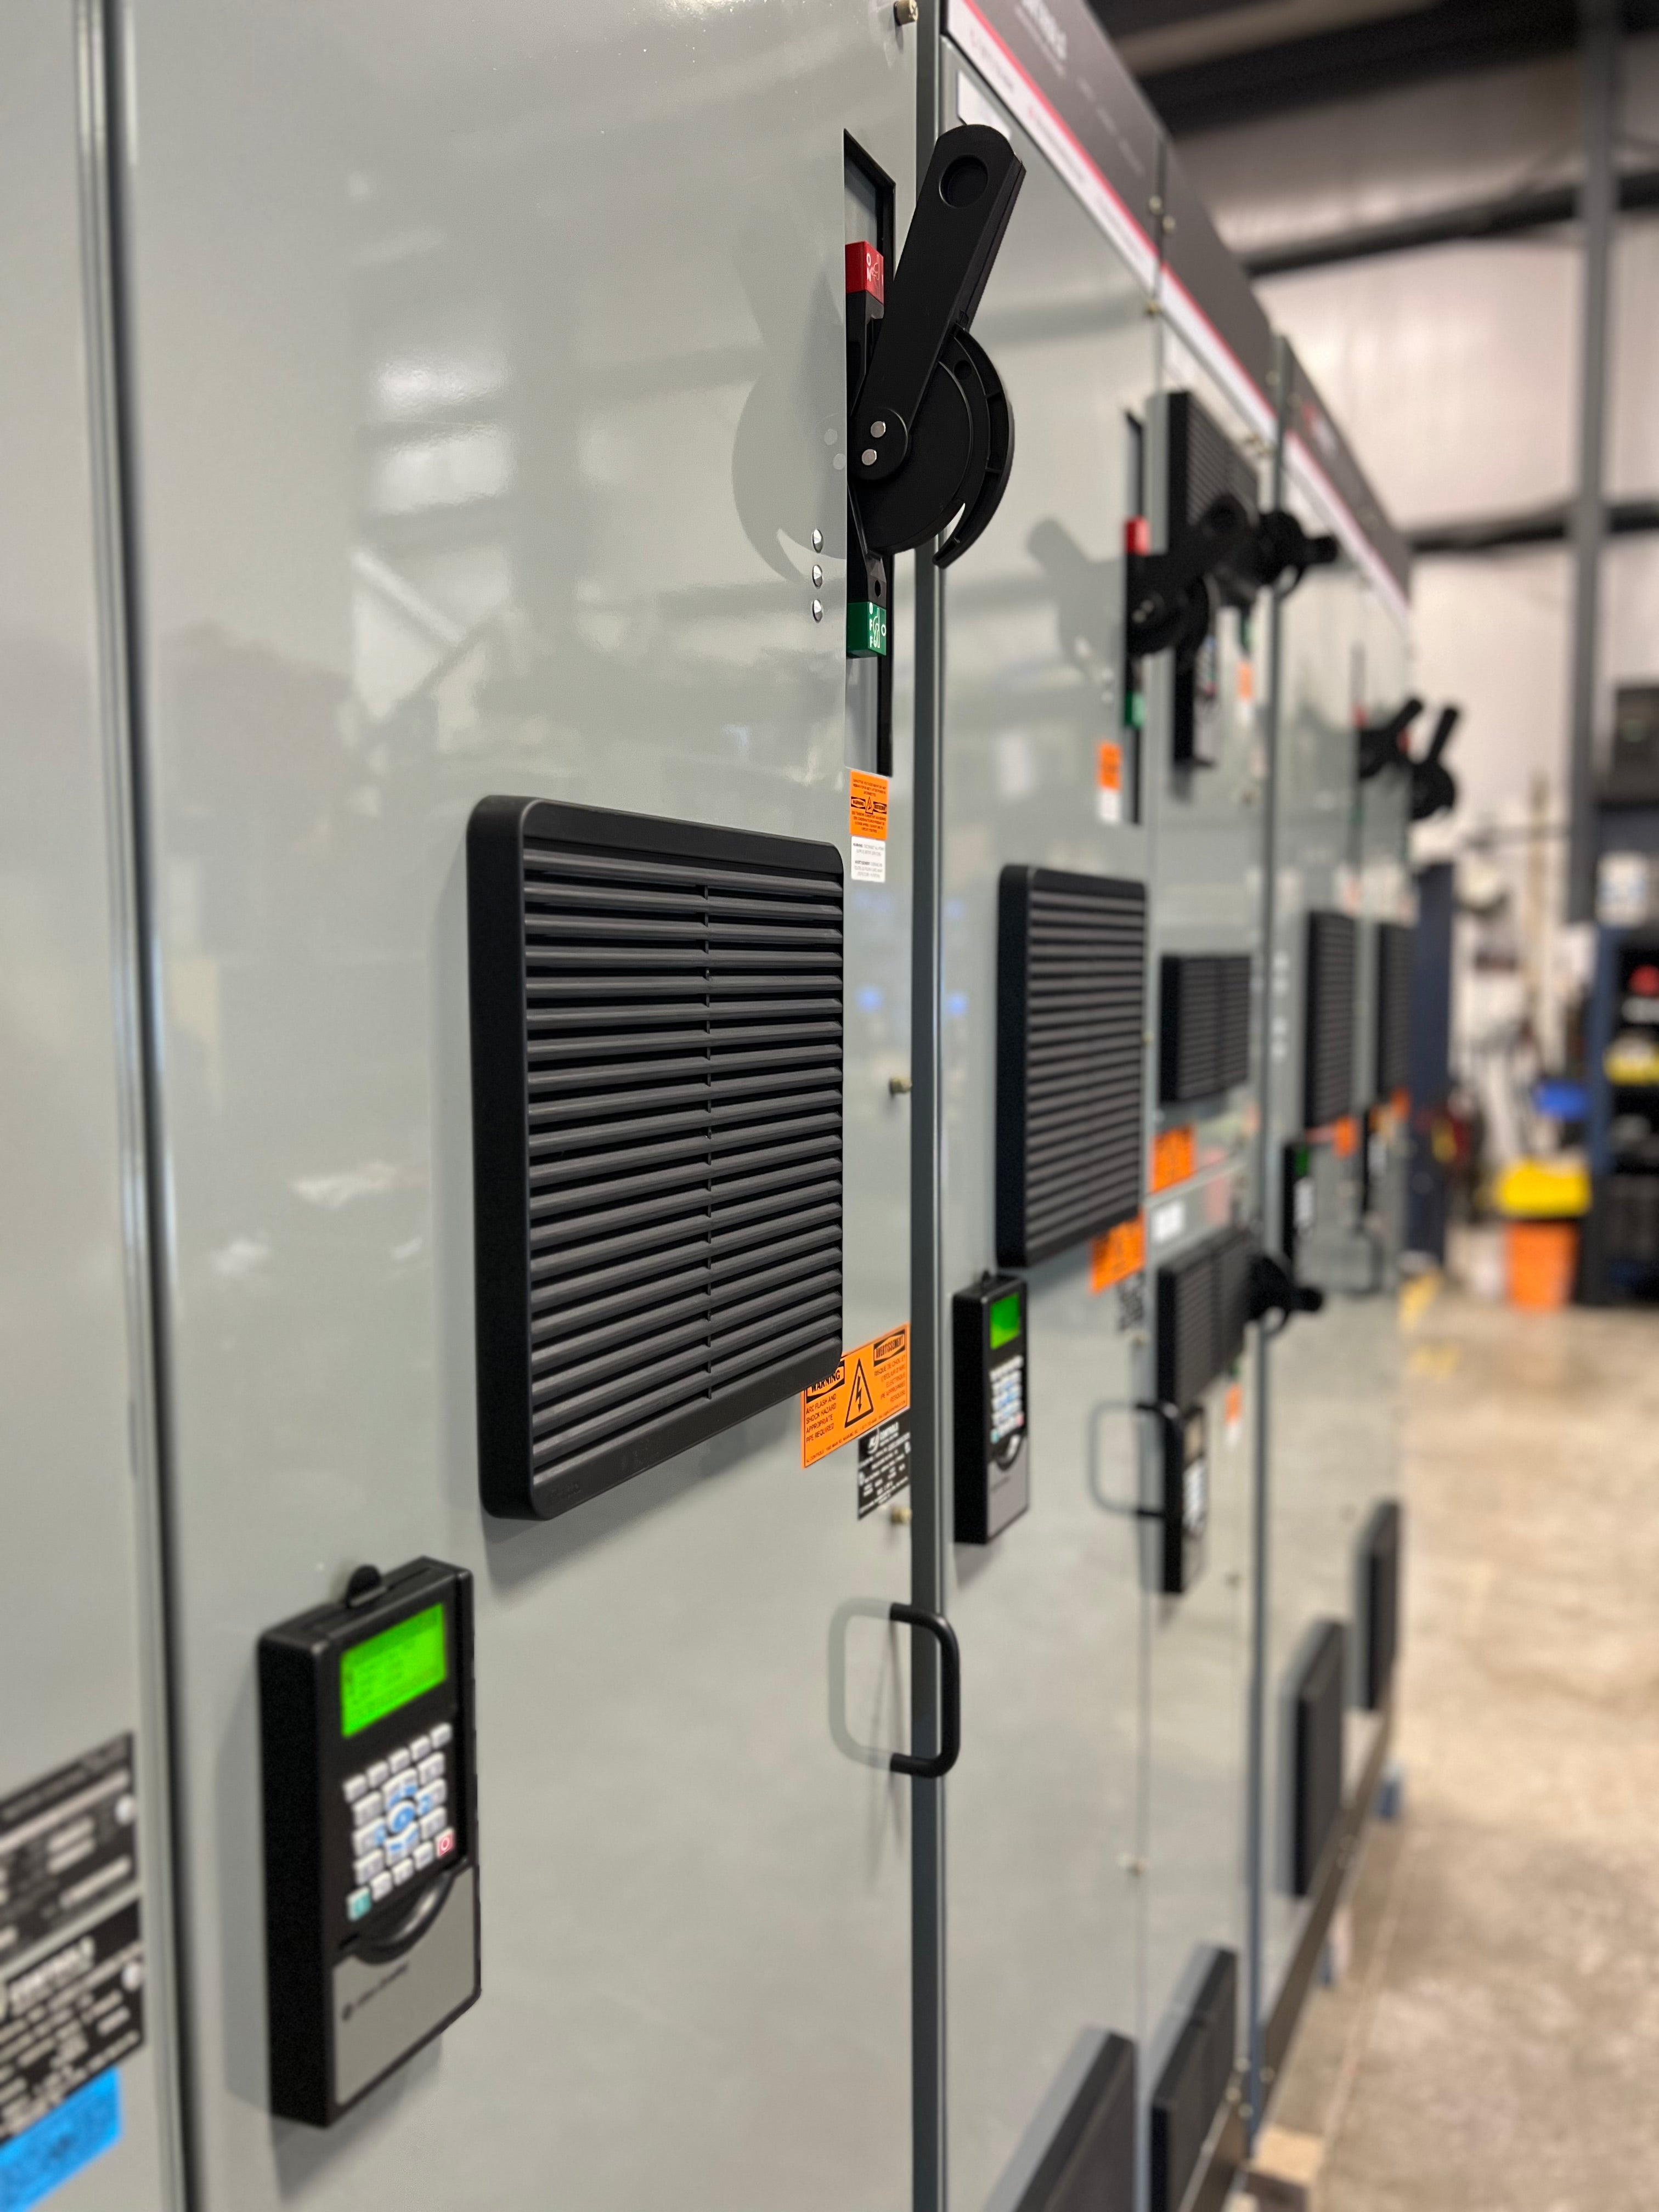 The Pros of Choosing Refurbished Motor Control Centers Over New Ones